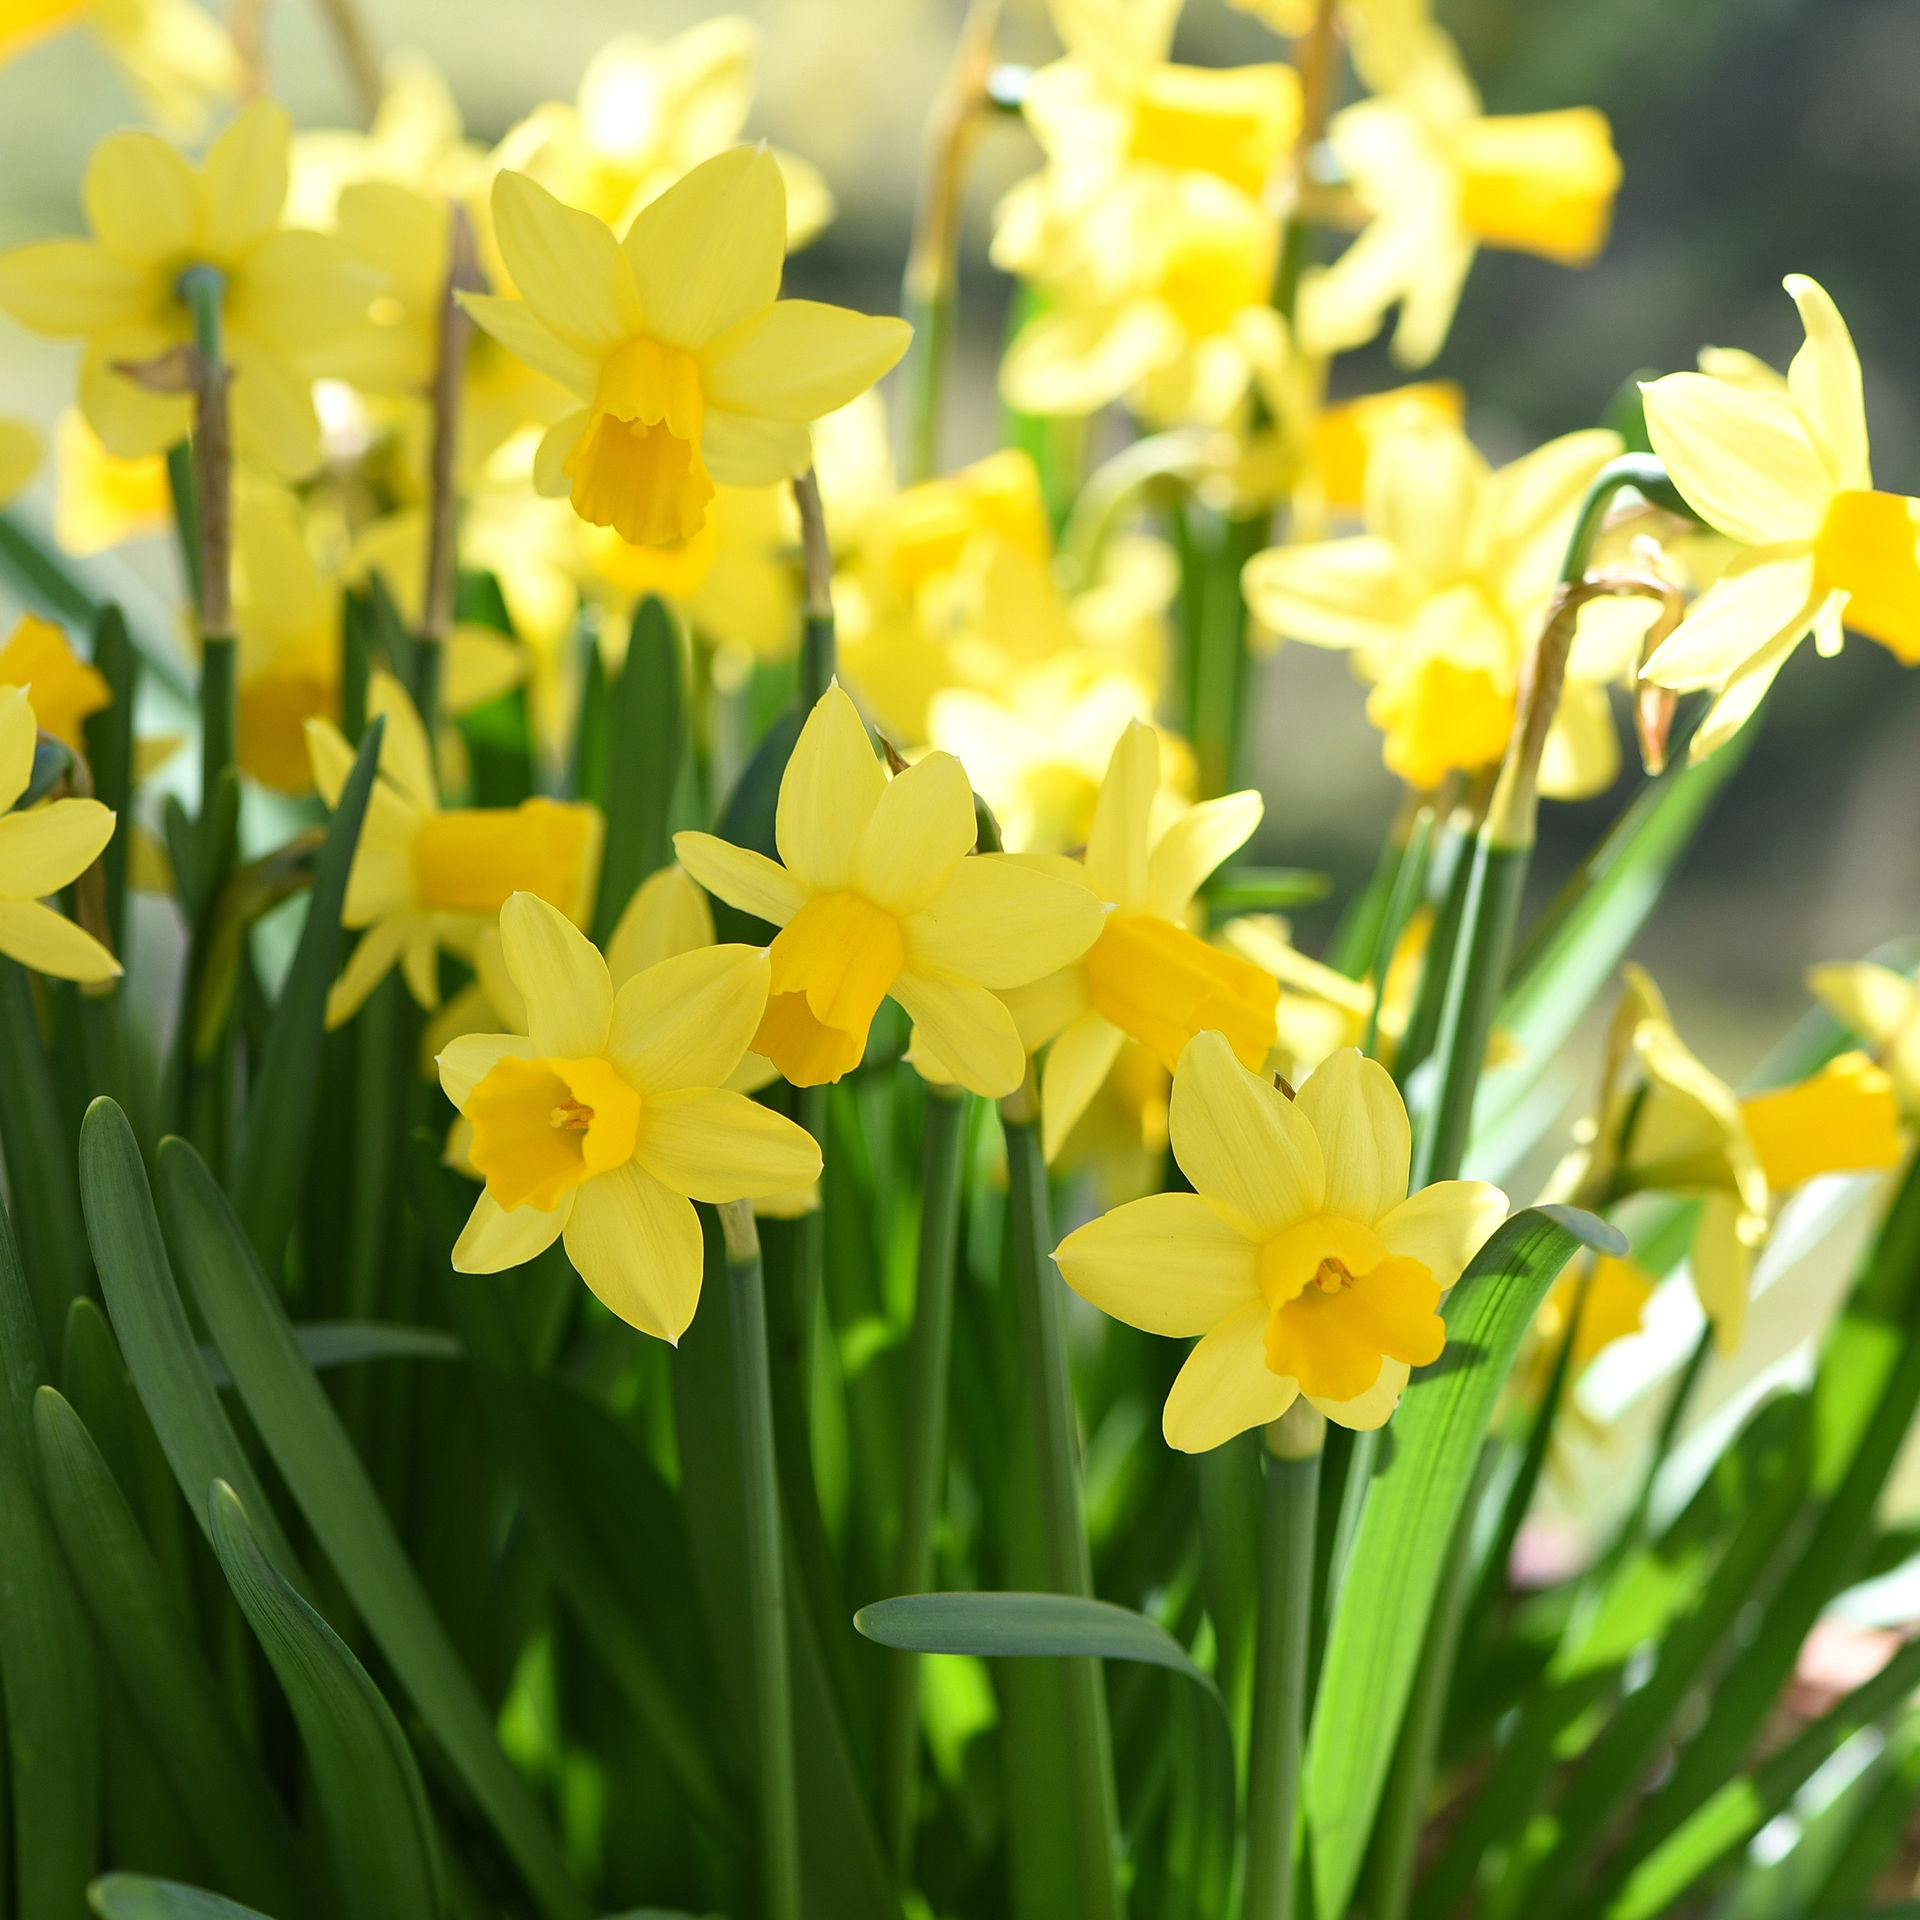 Tips for growing Narcissus